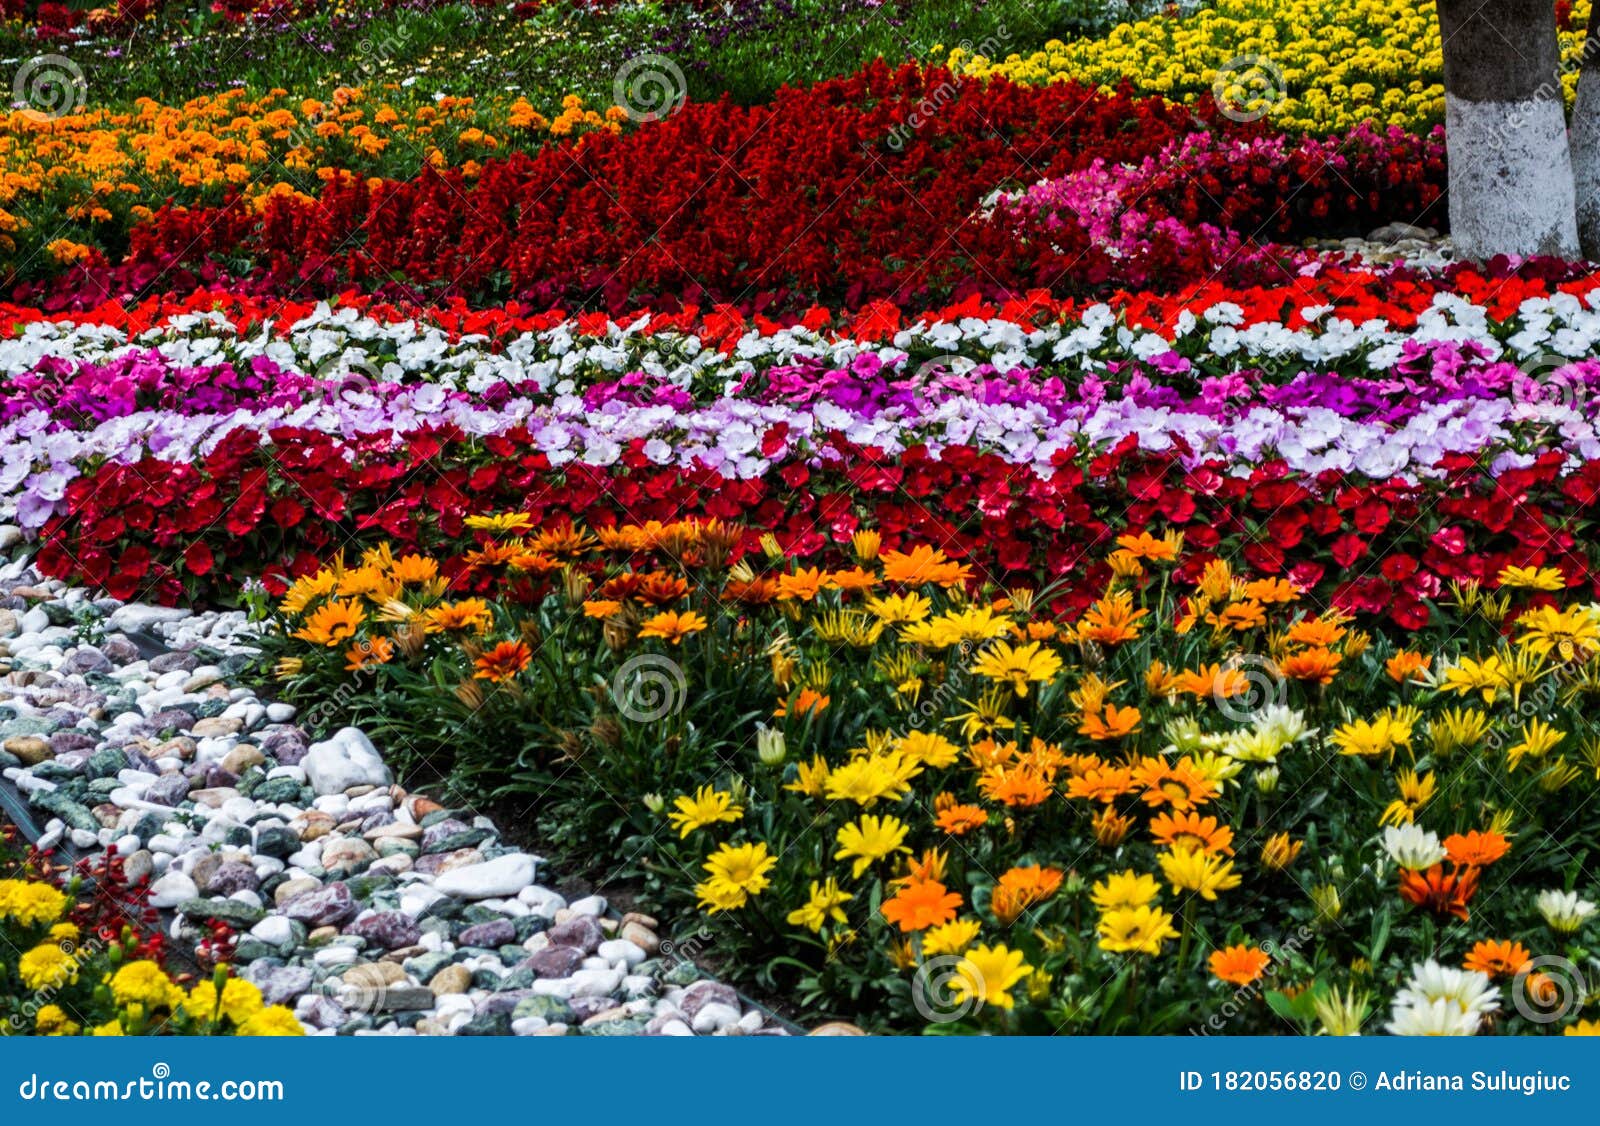 Multicolored flower bed stock photo. Image of field - 182056820